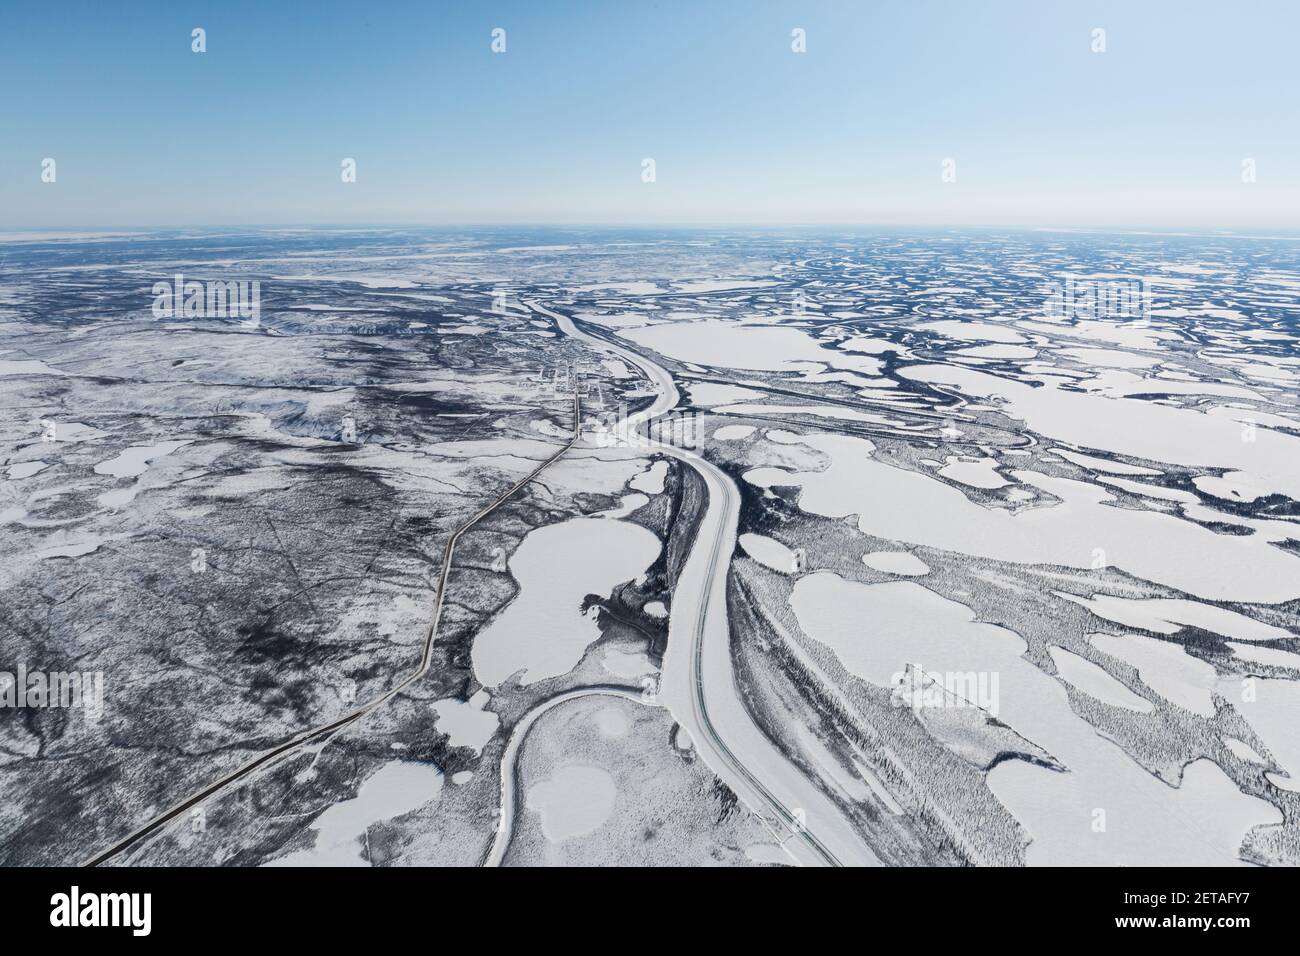 Aerial view of Mackenzie River ice road in winter, connecting communities in the Beaufort Delta, Northwest Territories, Canada's western Arctic. Stock Photo